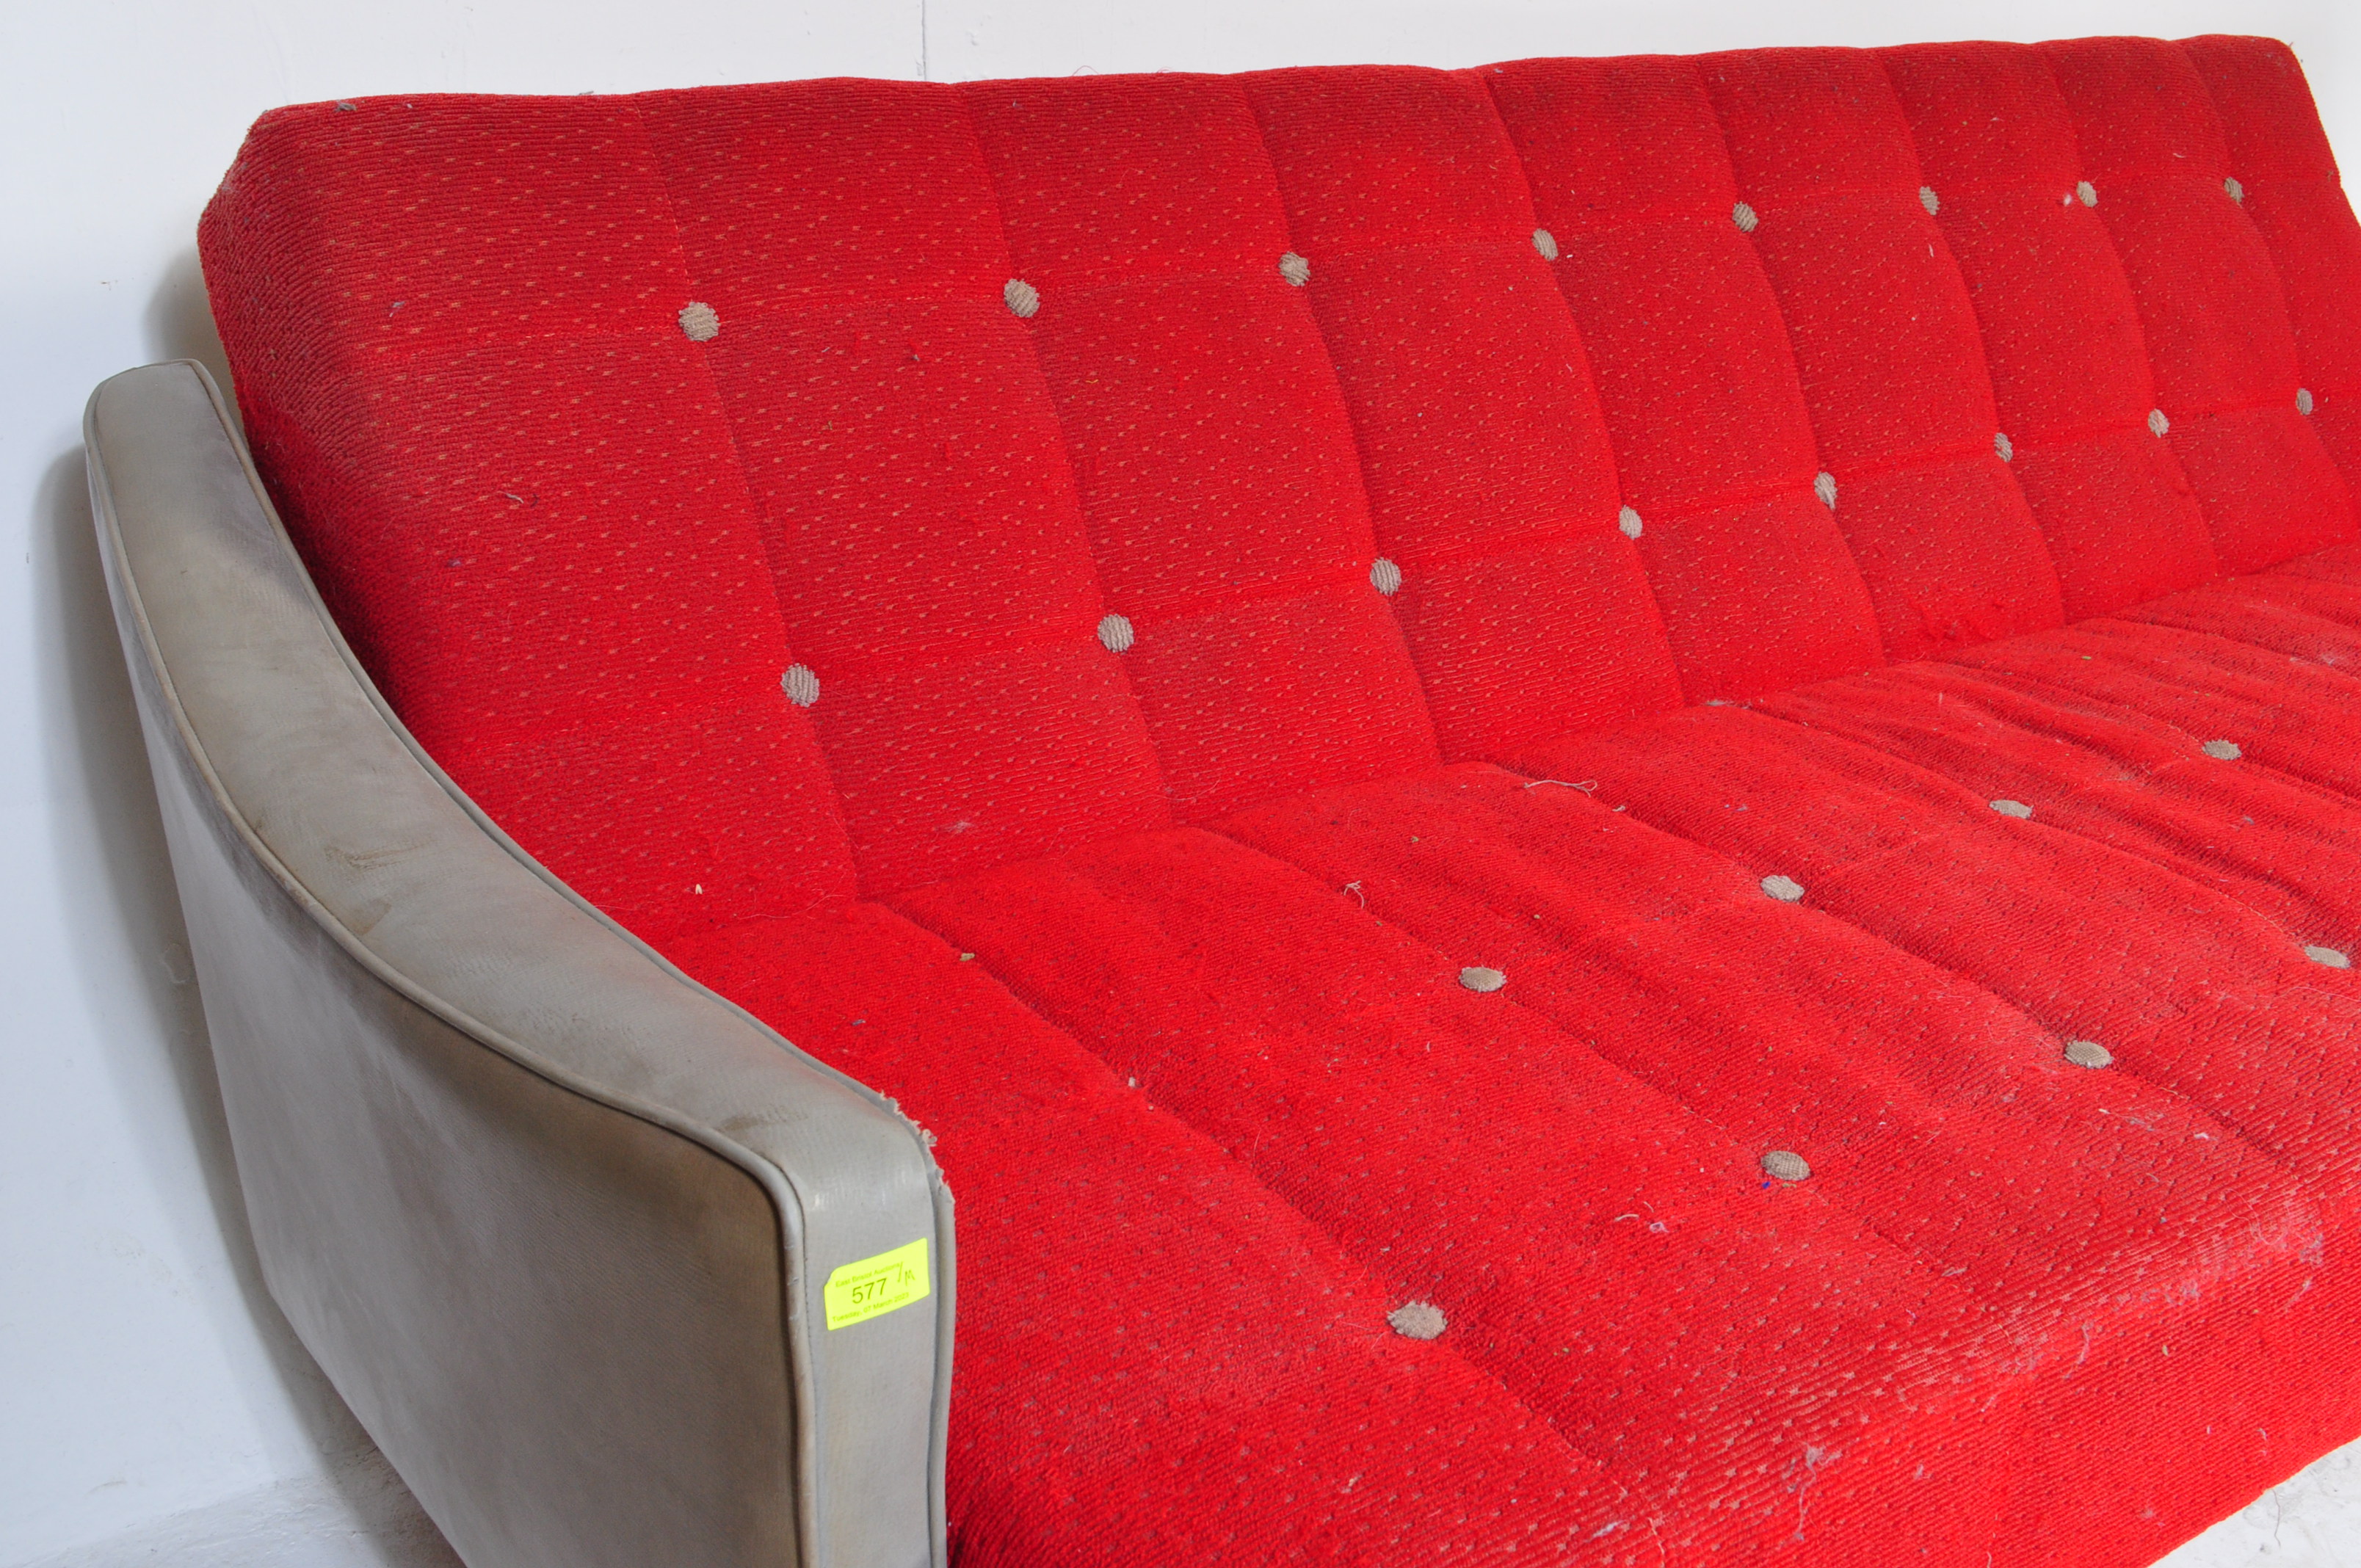 RETRO VINTAGE MID 20TH CENTURY SPACE AGE SOFA DAY BED - Image 3 of 5